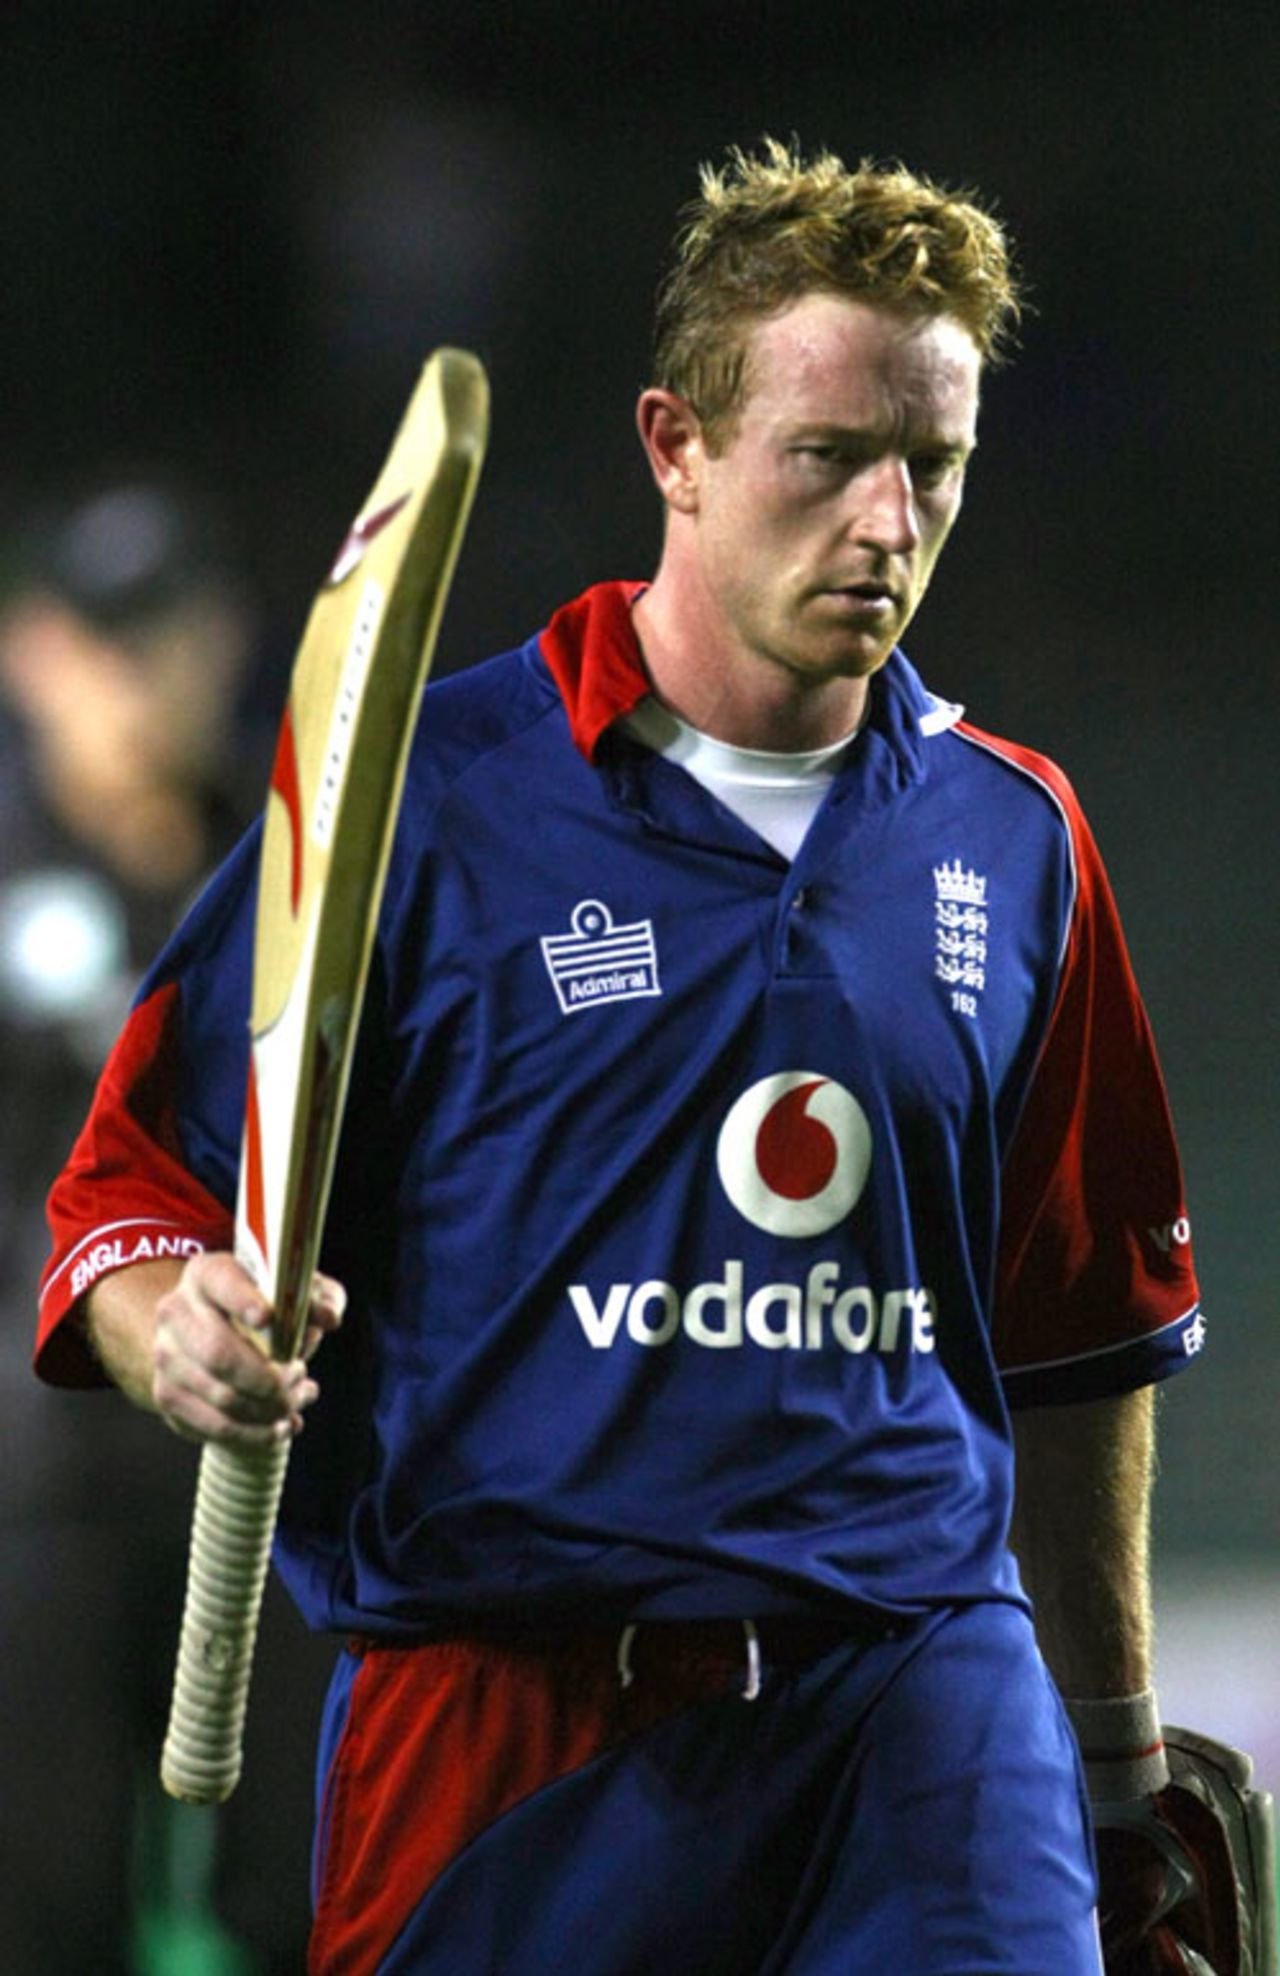 A determined-looking Paul Collingwood acknowledges the applause after cracking an unbeaten 70 in England's six-wicket win, New Zealand v England, 3rd ODI, Auckland, February 15, 2008